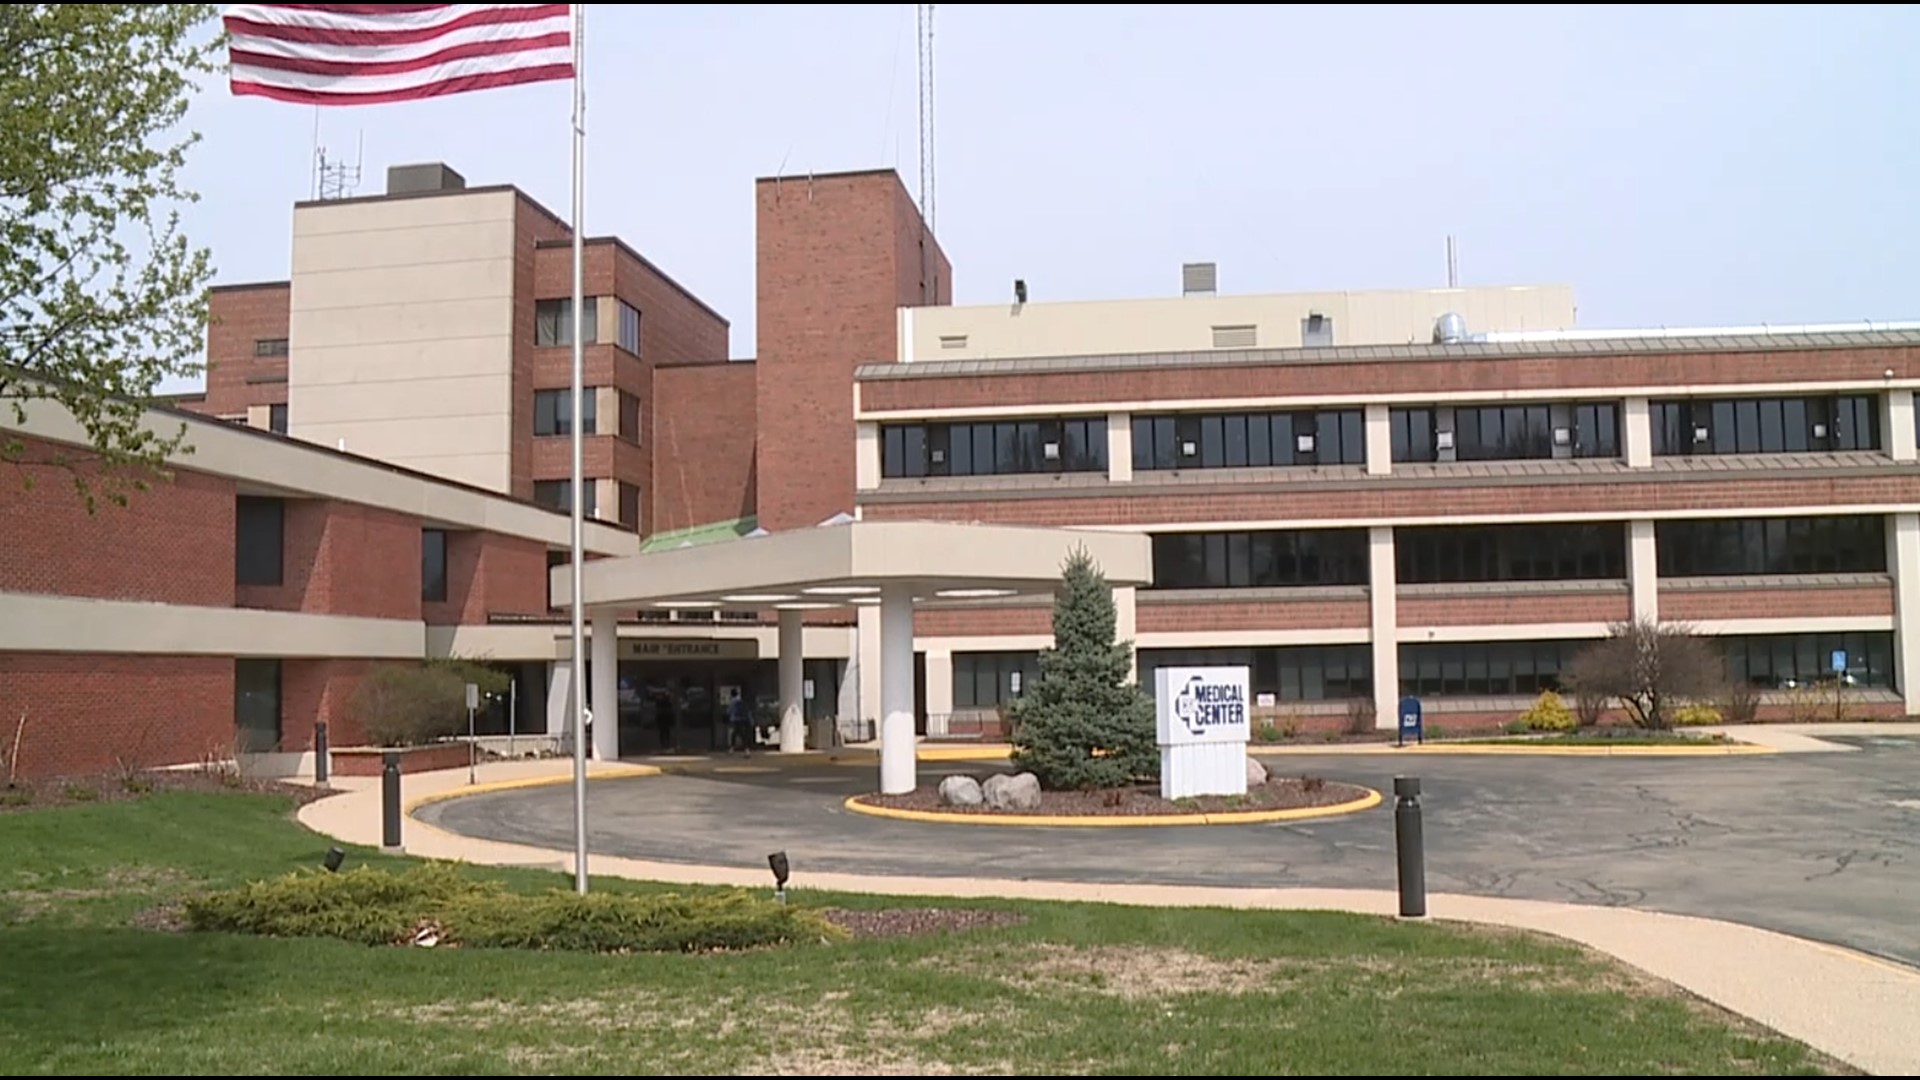 Nearly 900 CGH Medical Center health care workers voted to unionize in April 2021. Now, some union members blame hospital management for stalling negotiations.